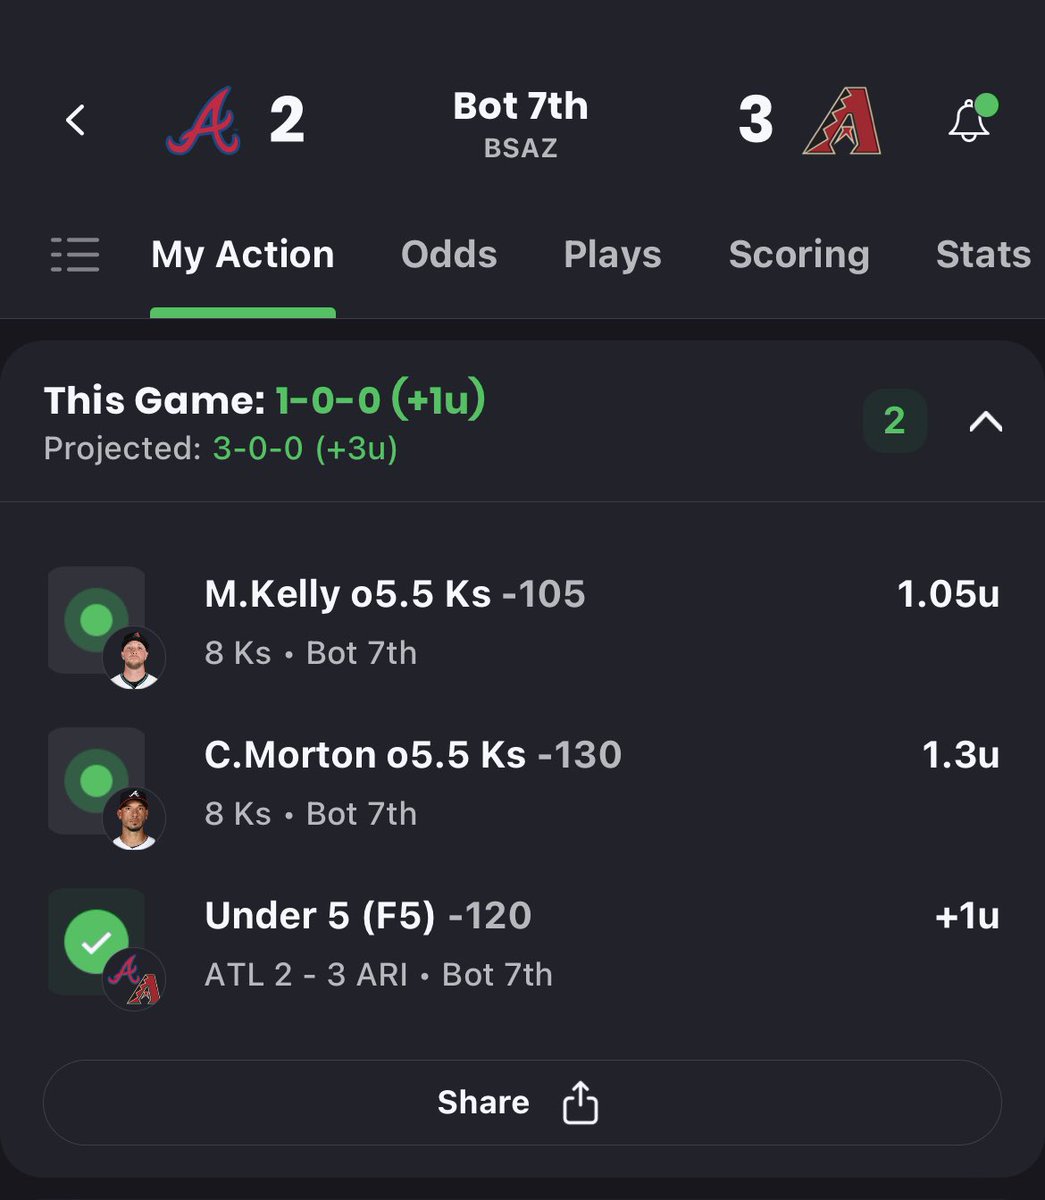 FREE PLAY CLEAN SWEEP 🧹🧹 BRAVES/DBACKS F5 U 5 ✅ CHARLIE MORTON O 5.5K ✅ MERRILL KELLY O 5.5K ✅ Thats how we do things over here 🥱. you either tail or lose ITS NOT GAMBLING WHEN YOU KNOW YOULL WIN 🎰🎰